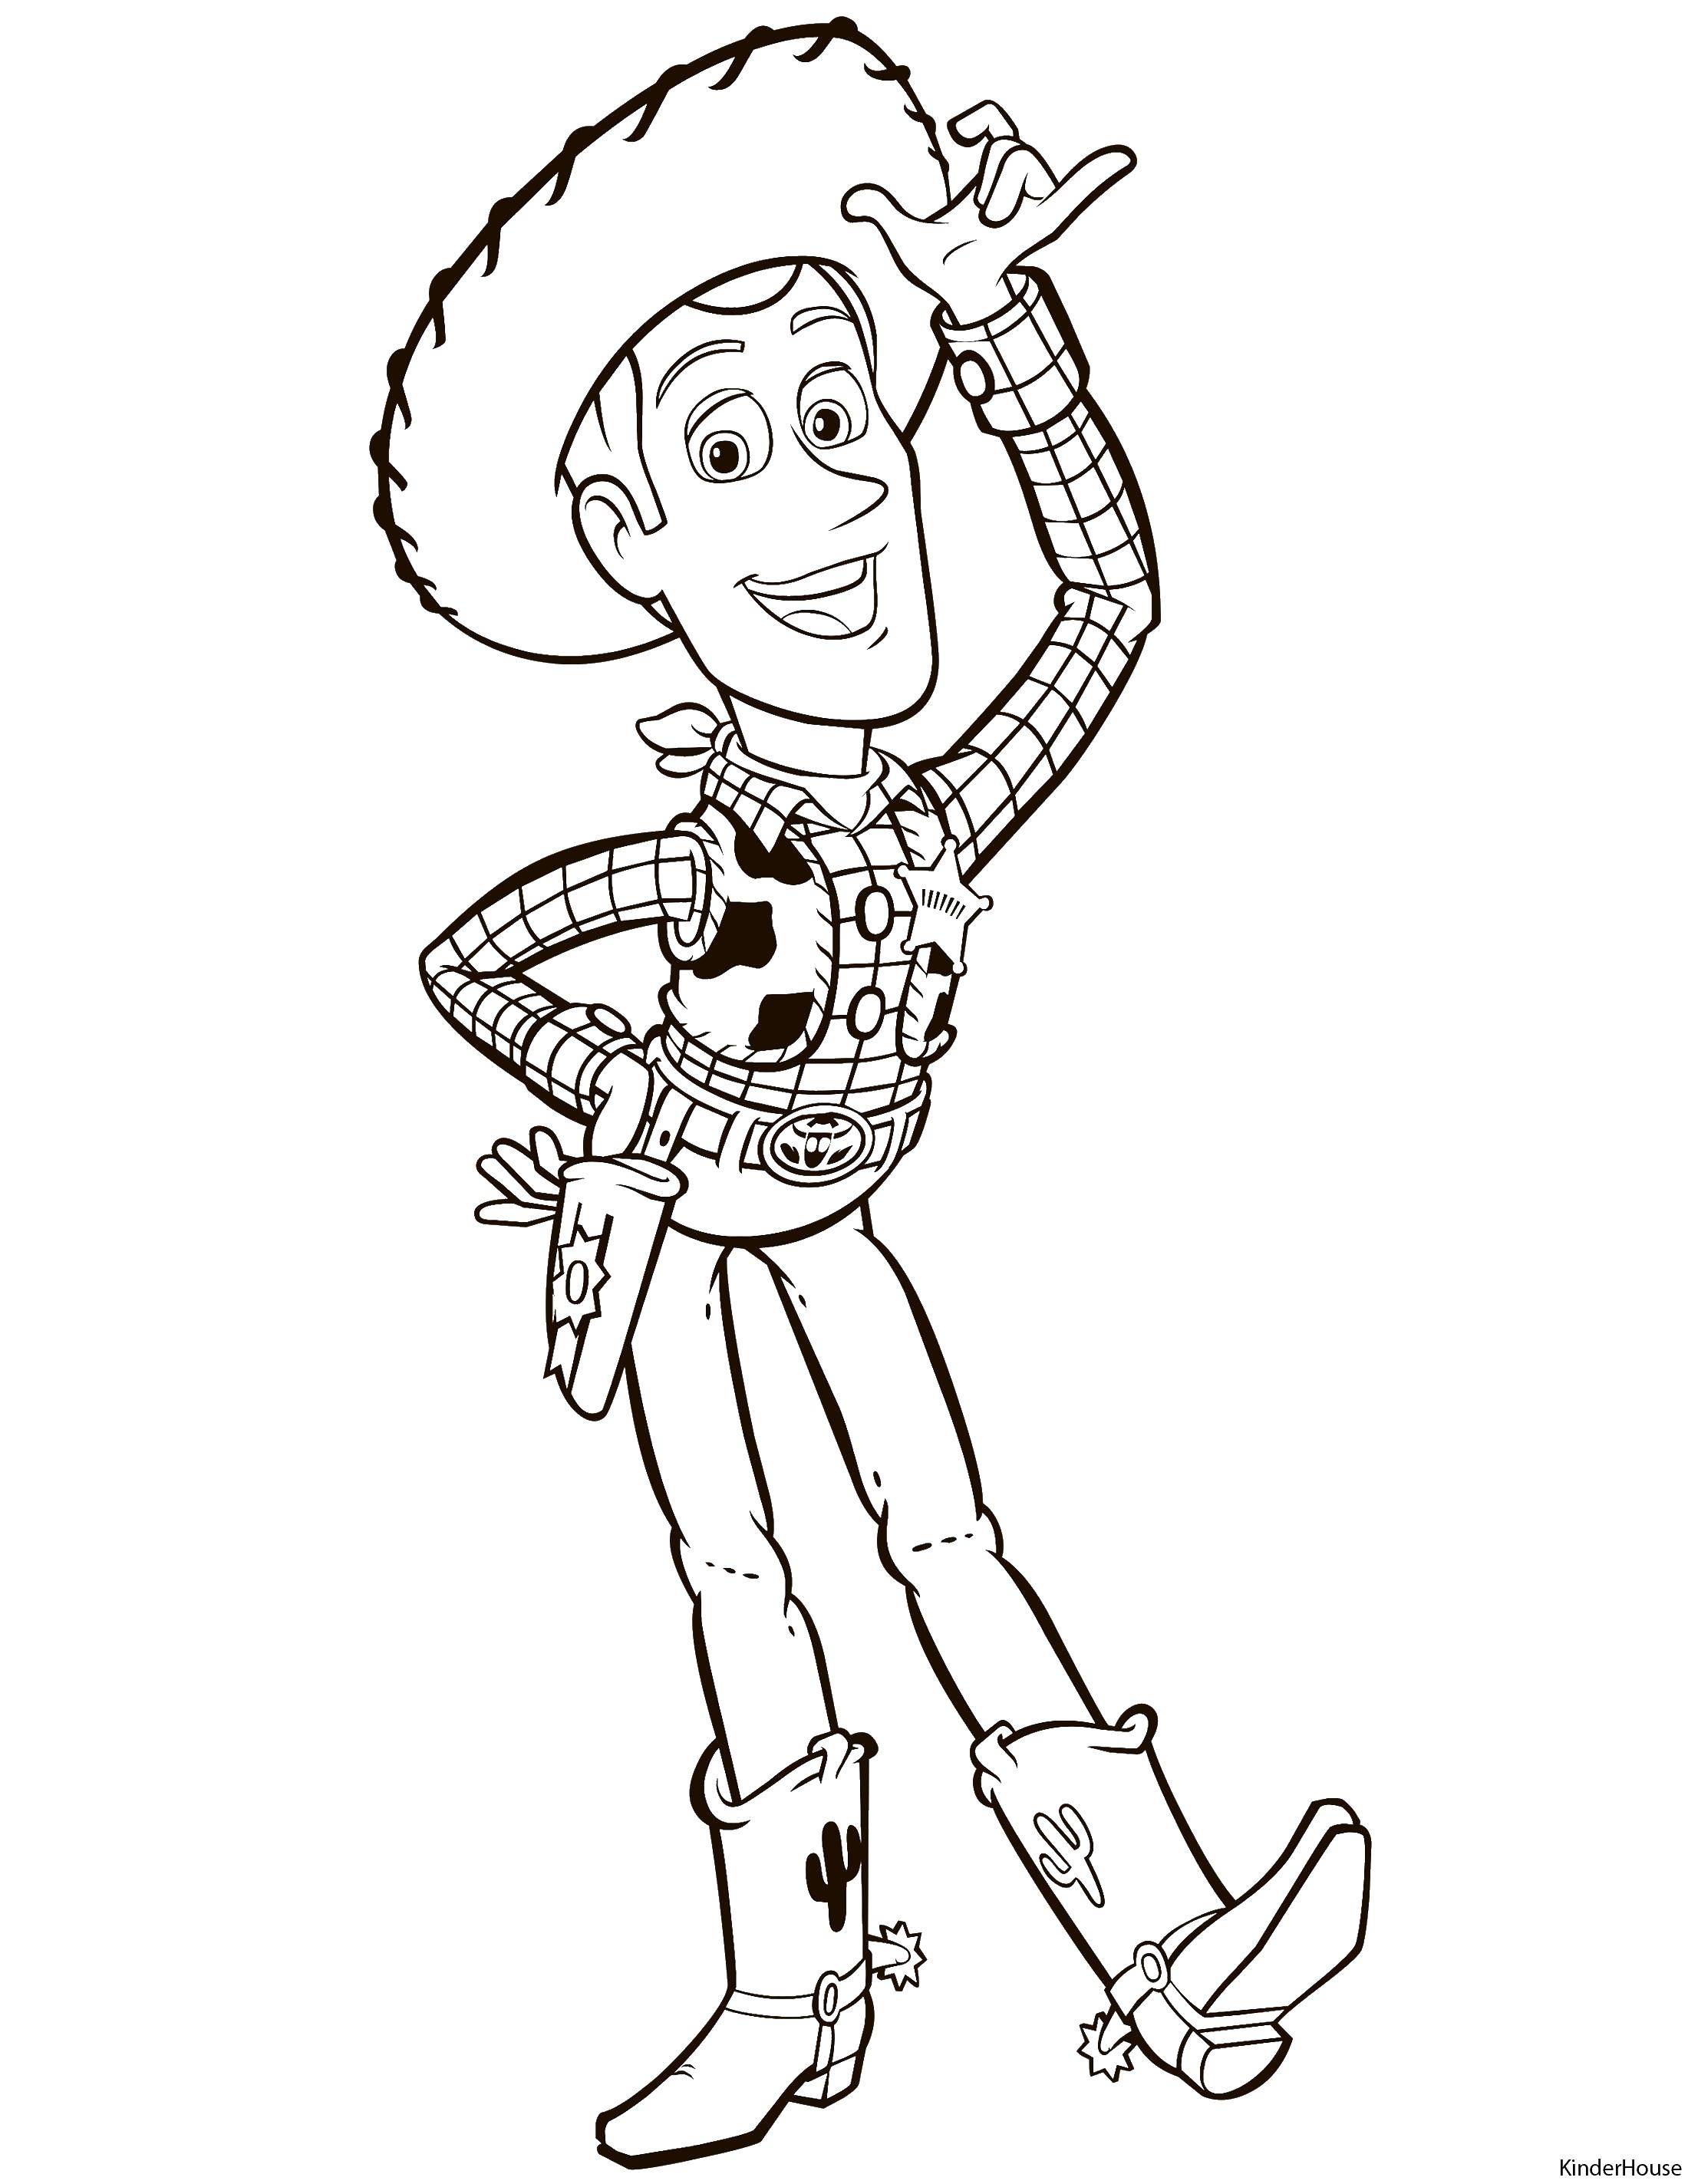 Coloring Cowboy woody. Category toy story. Tags:  Woody, toys.